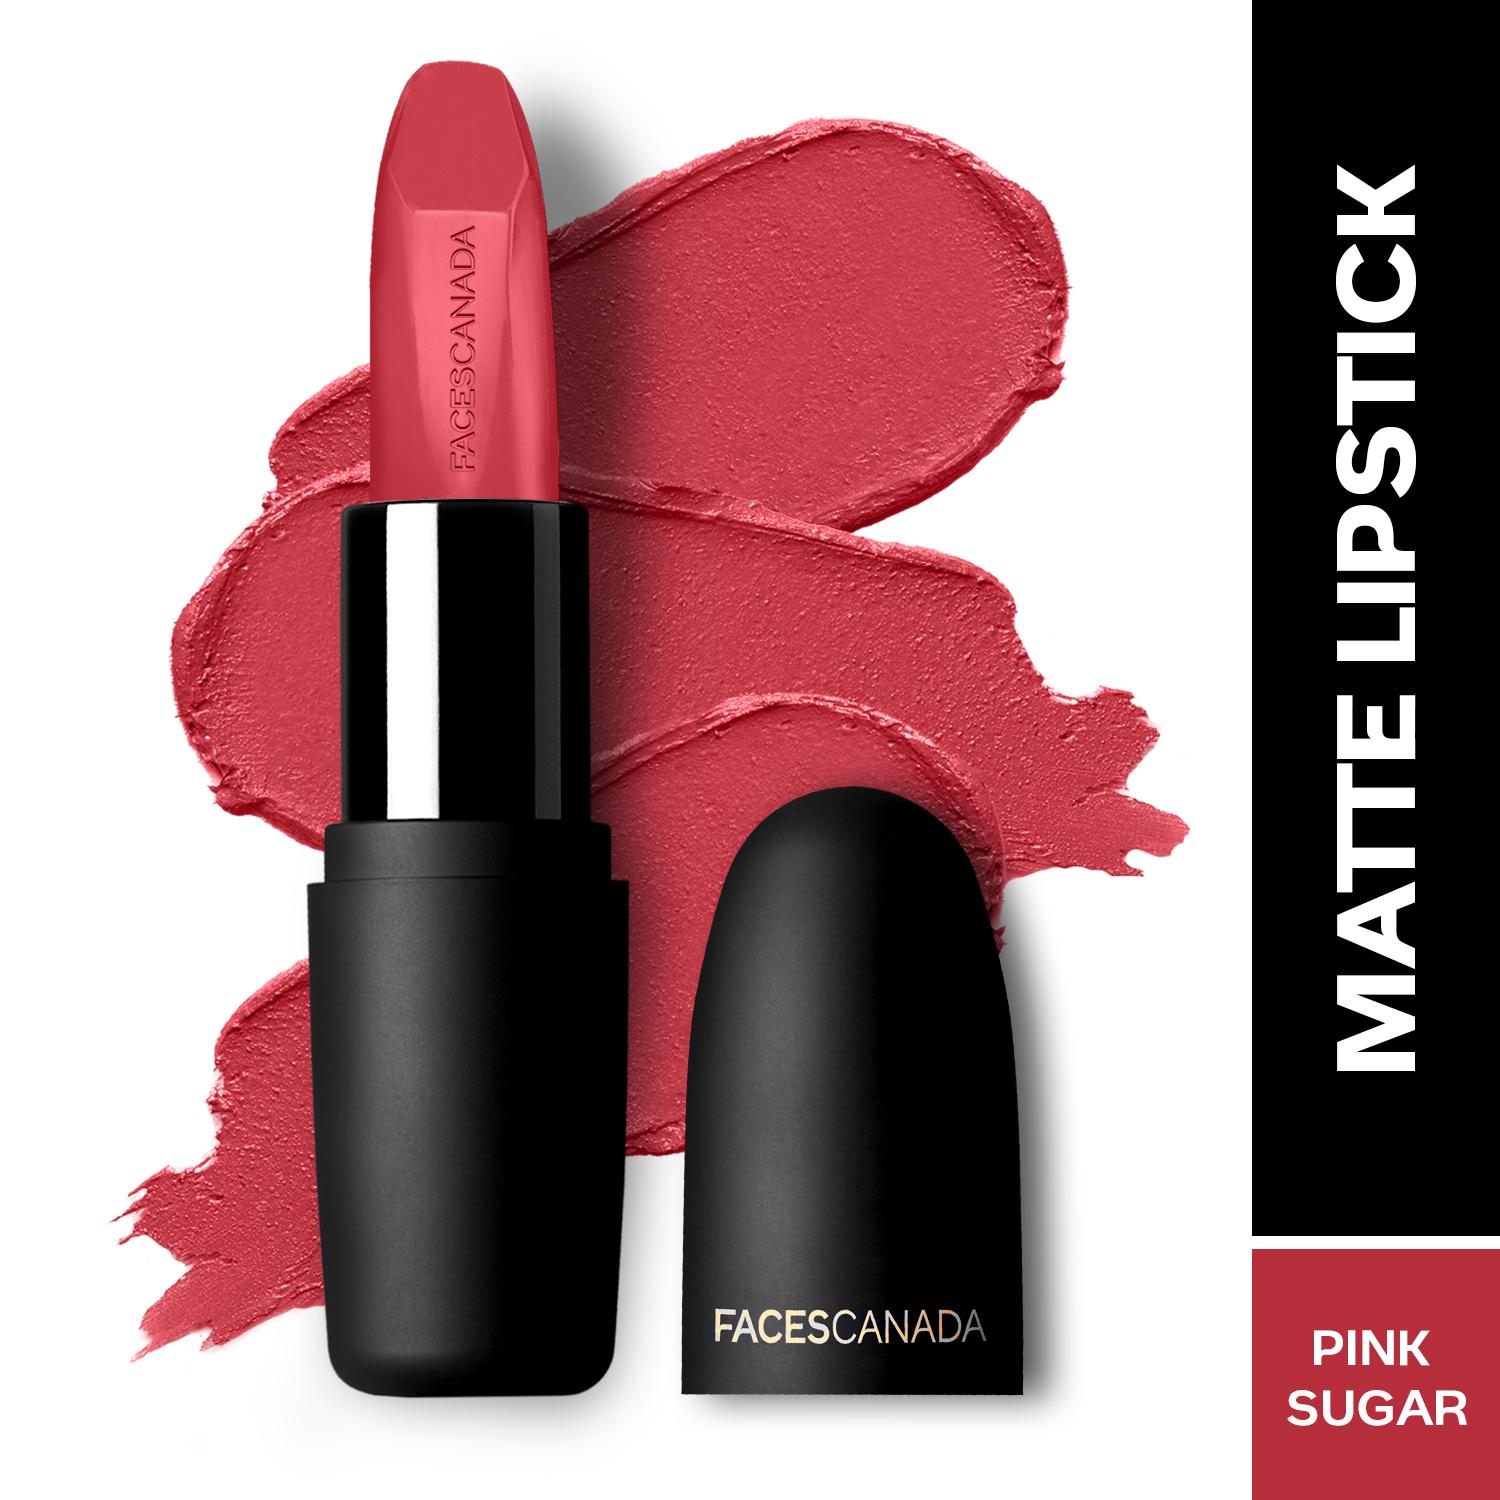 Faces Canada Weightless Matte Lipstick, Pigmented and Hydrated Lips - Pink Sugar 04 (4.5 g)